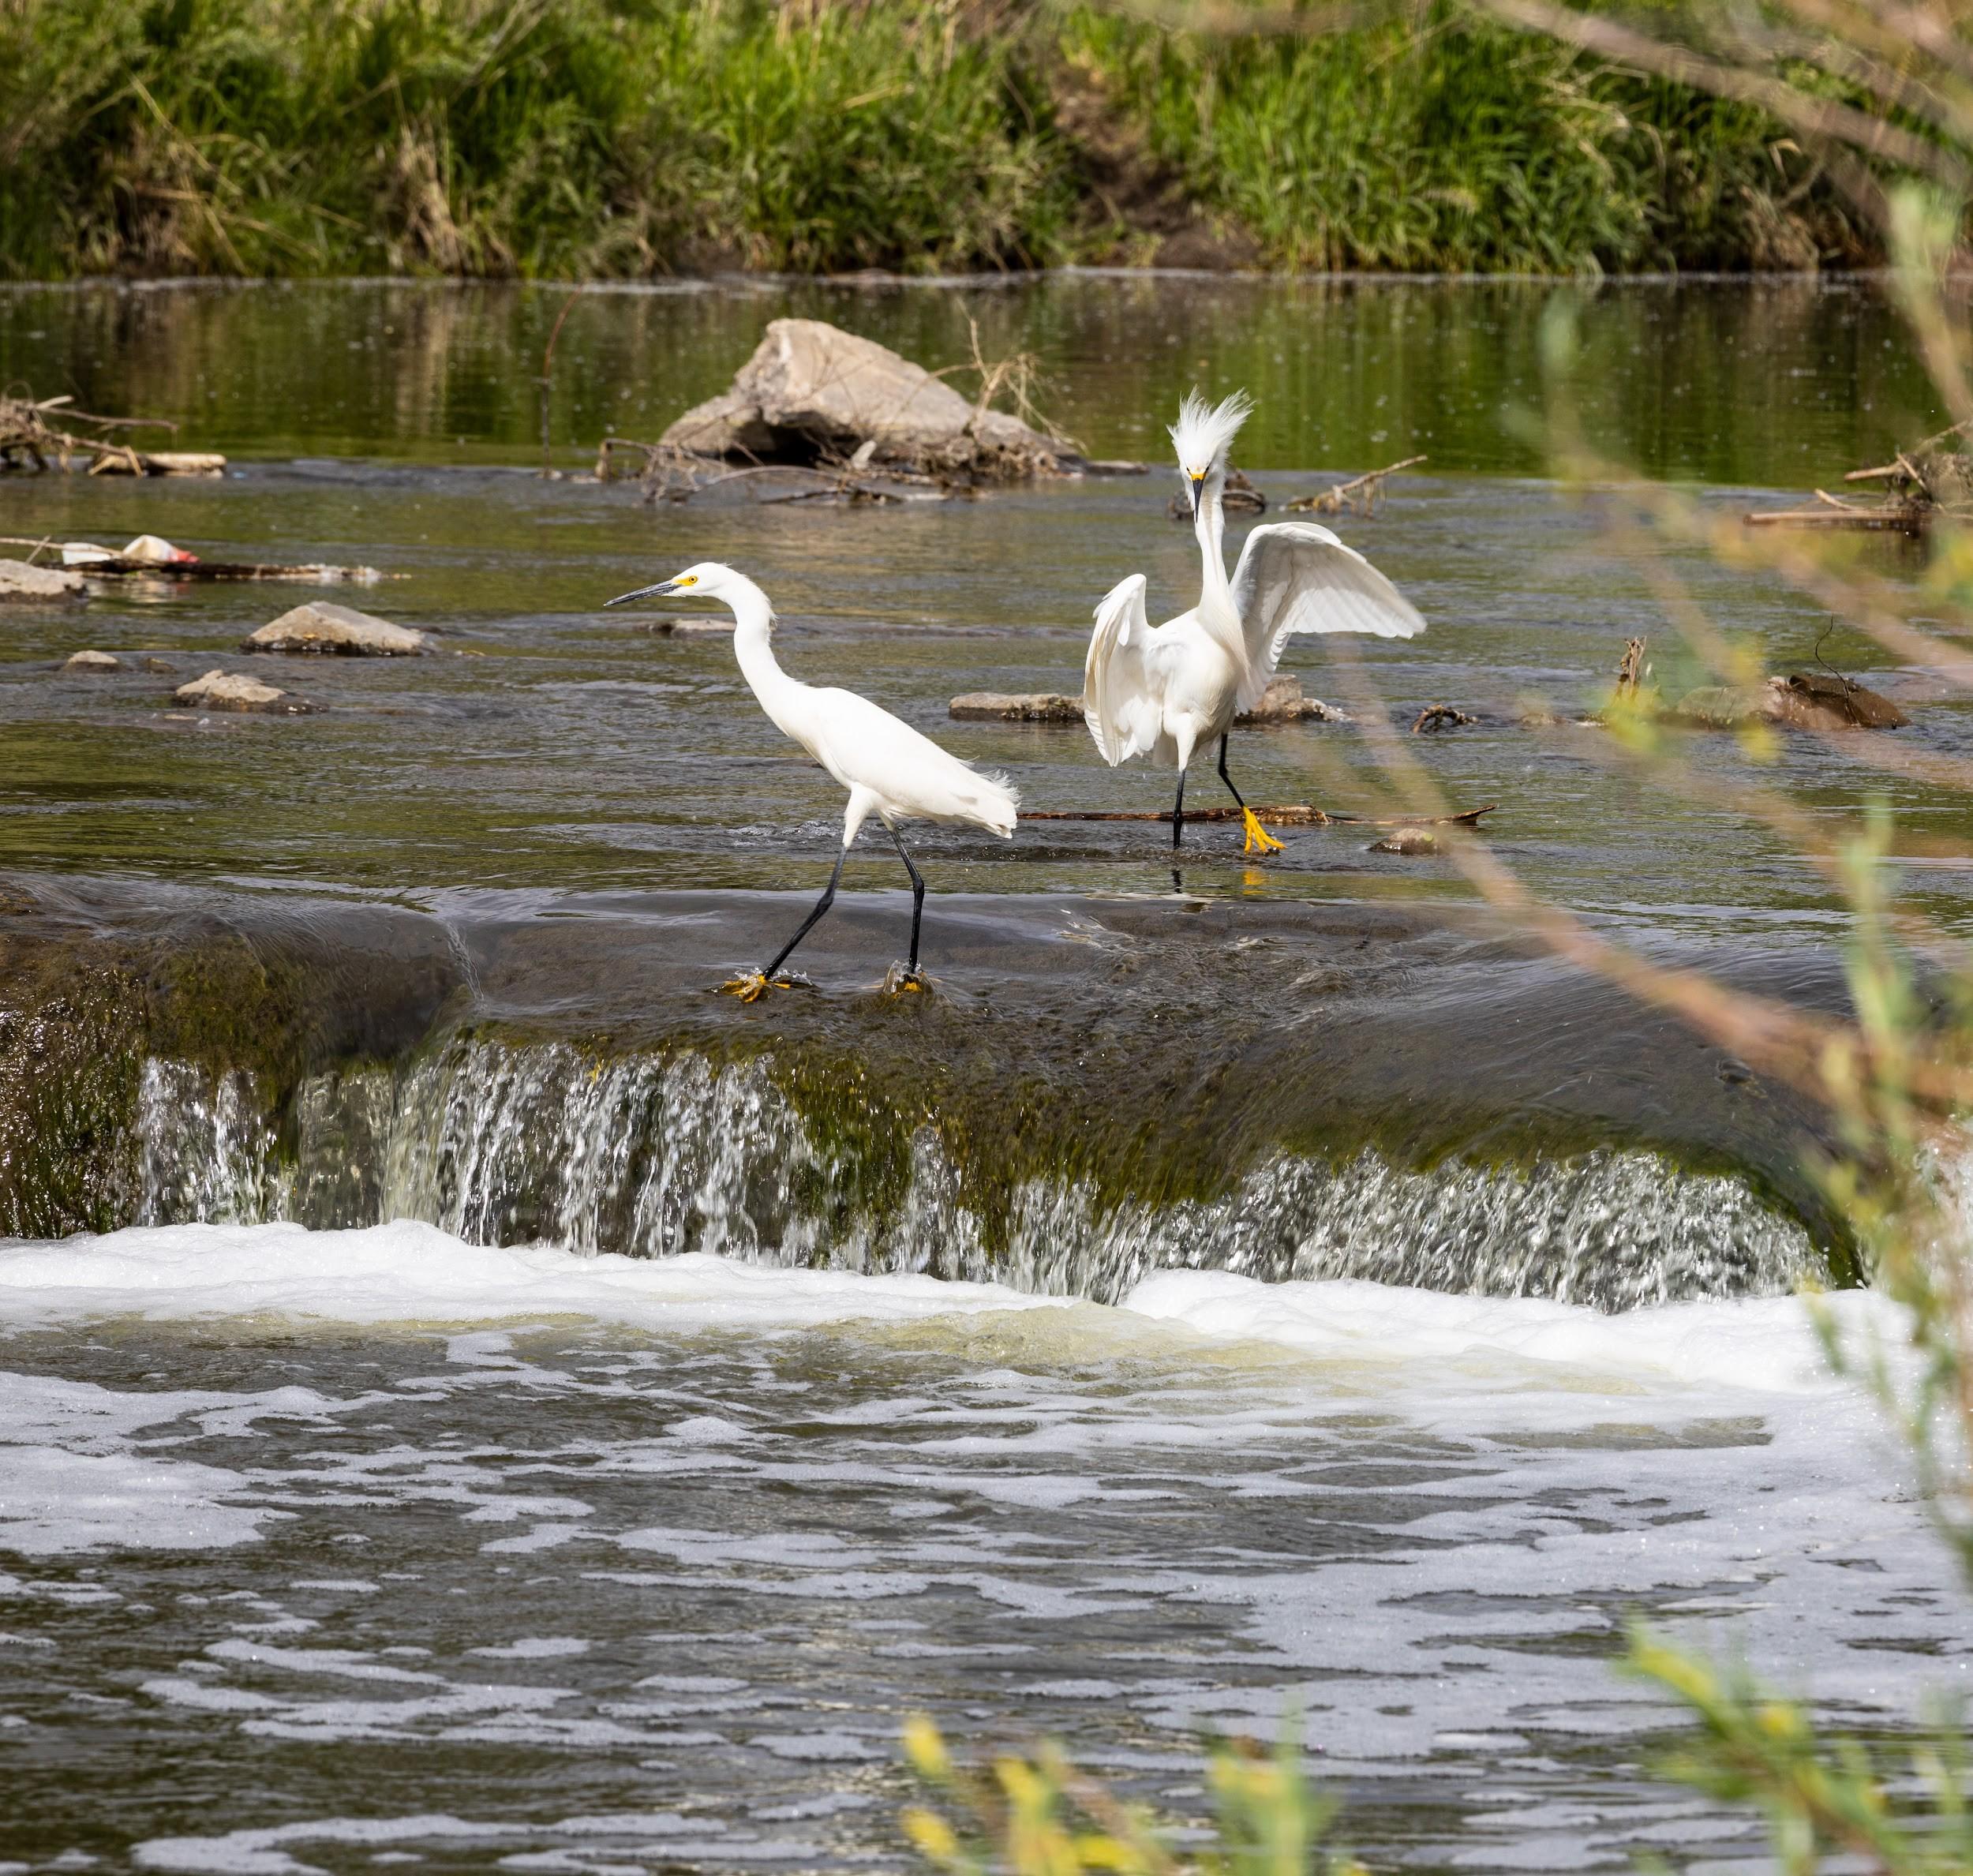 Two snowy egrets playing in a waterfall at Bluff Lake.